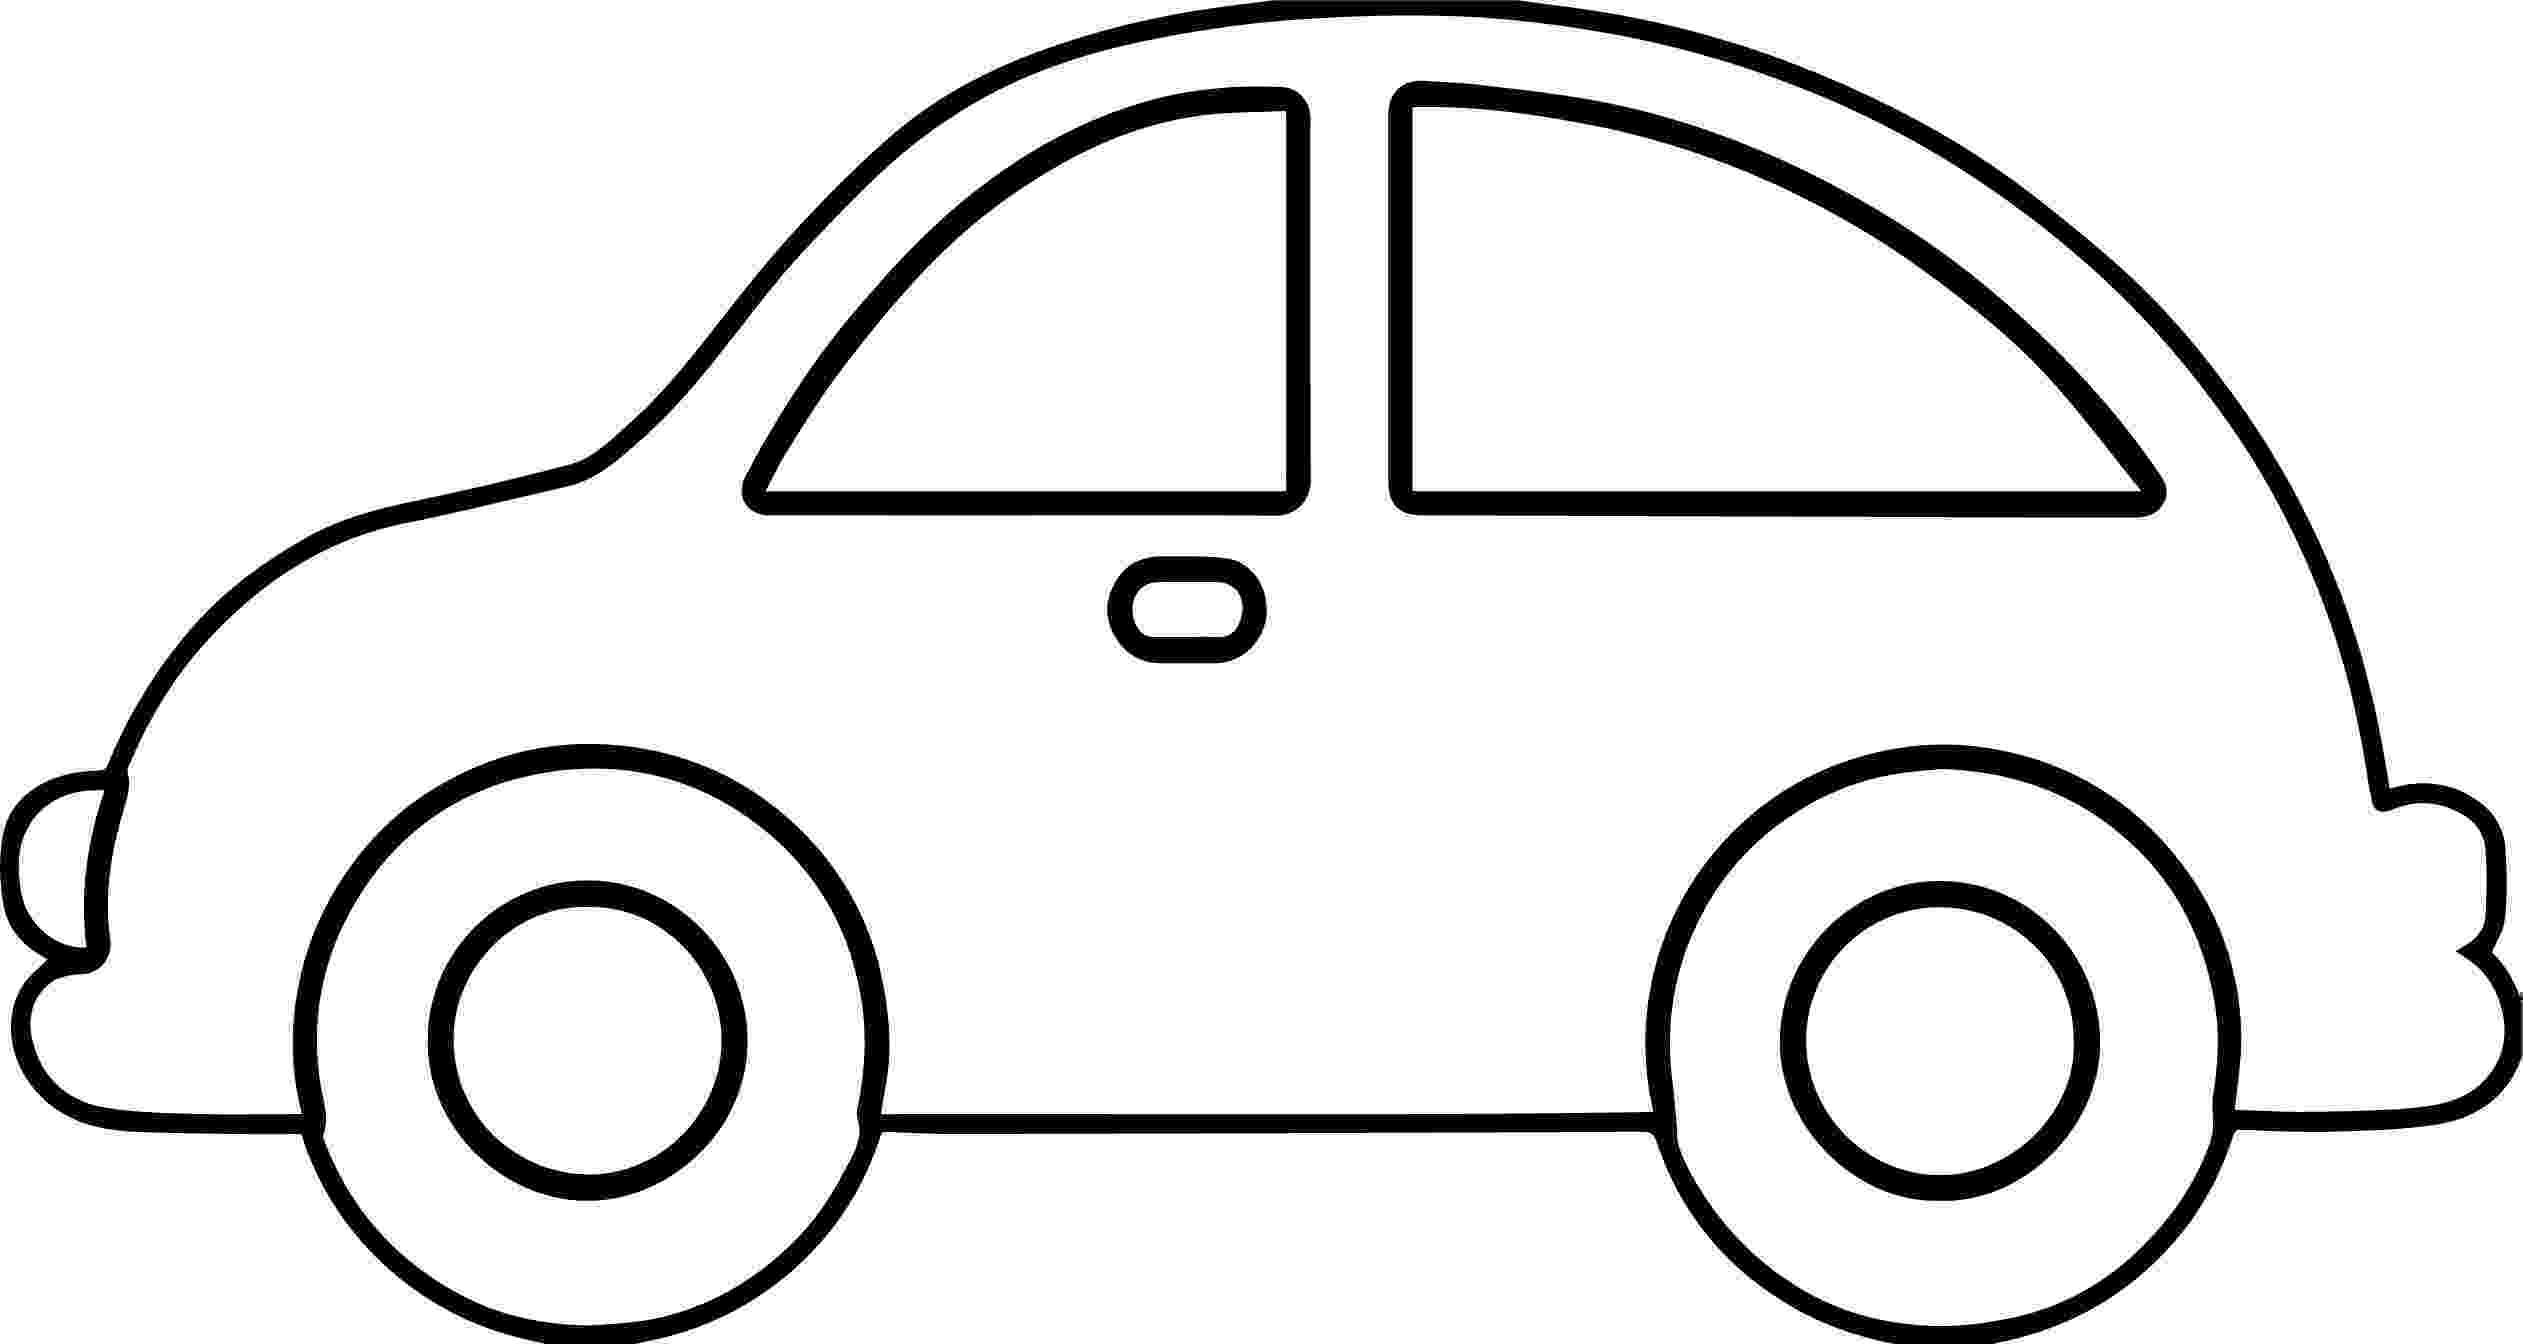 car coloring pages for preschoolers black and white cartoon car car outline free download car coloring preschoolers pages for 